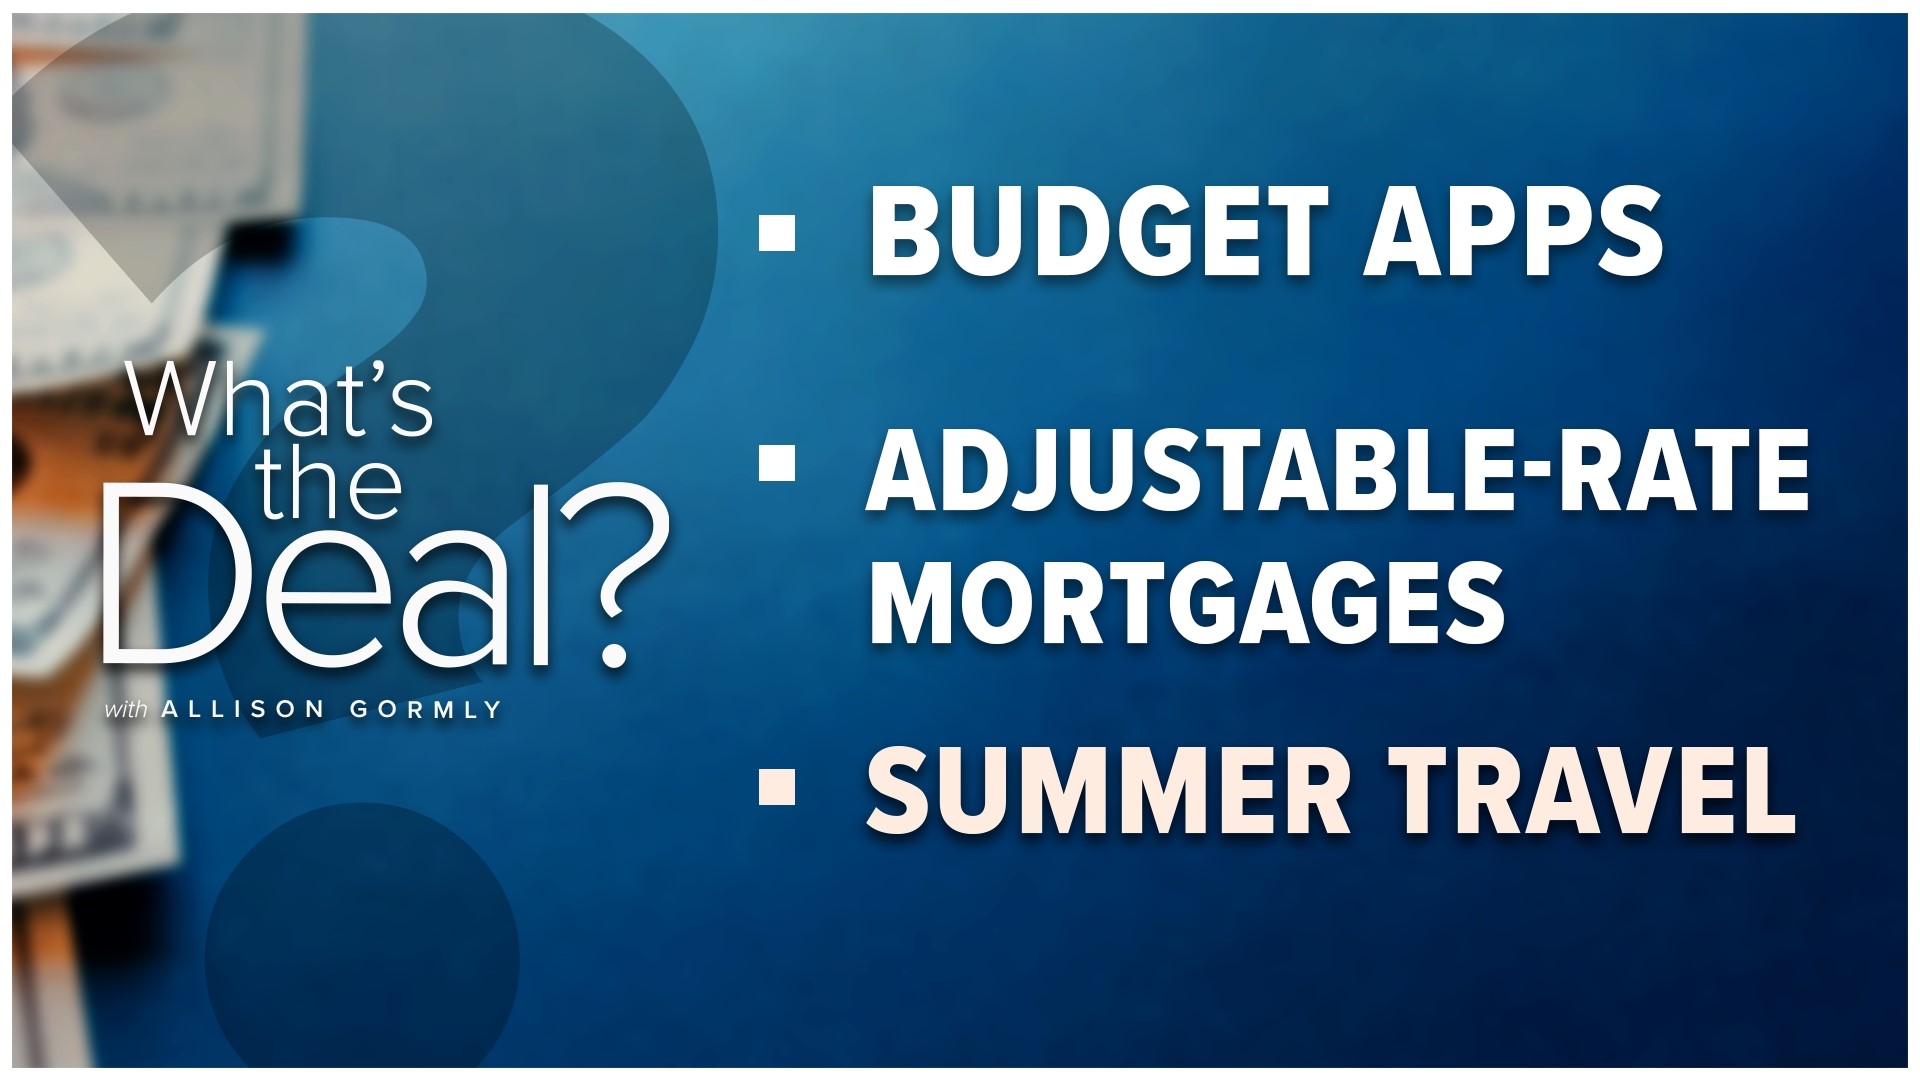 We explain what's the deal when it comes to budget apps, saving money during your summer travel trips and adjustable-rate mortgages